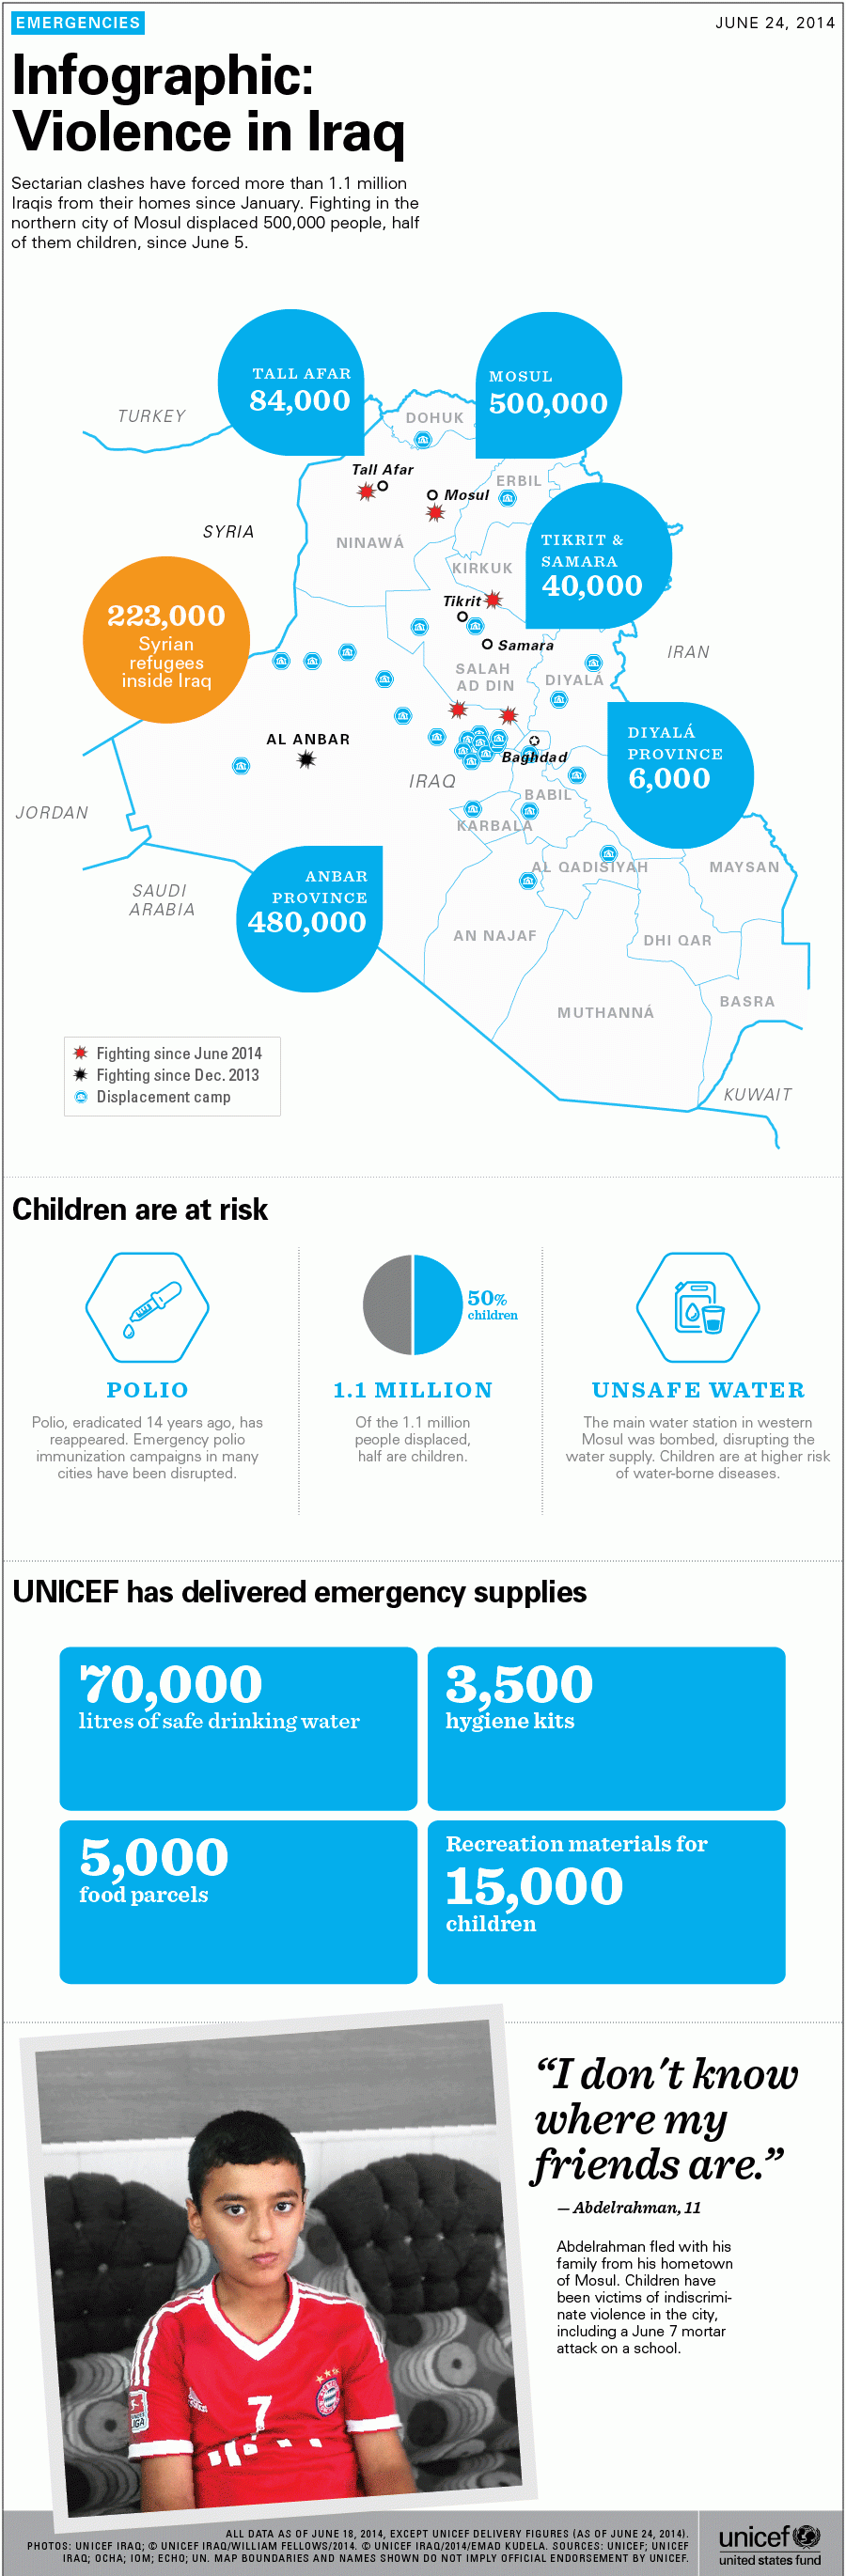 Infographic: Facts About the Violence in Iraq